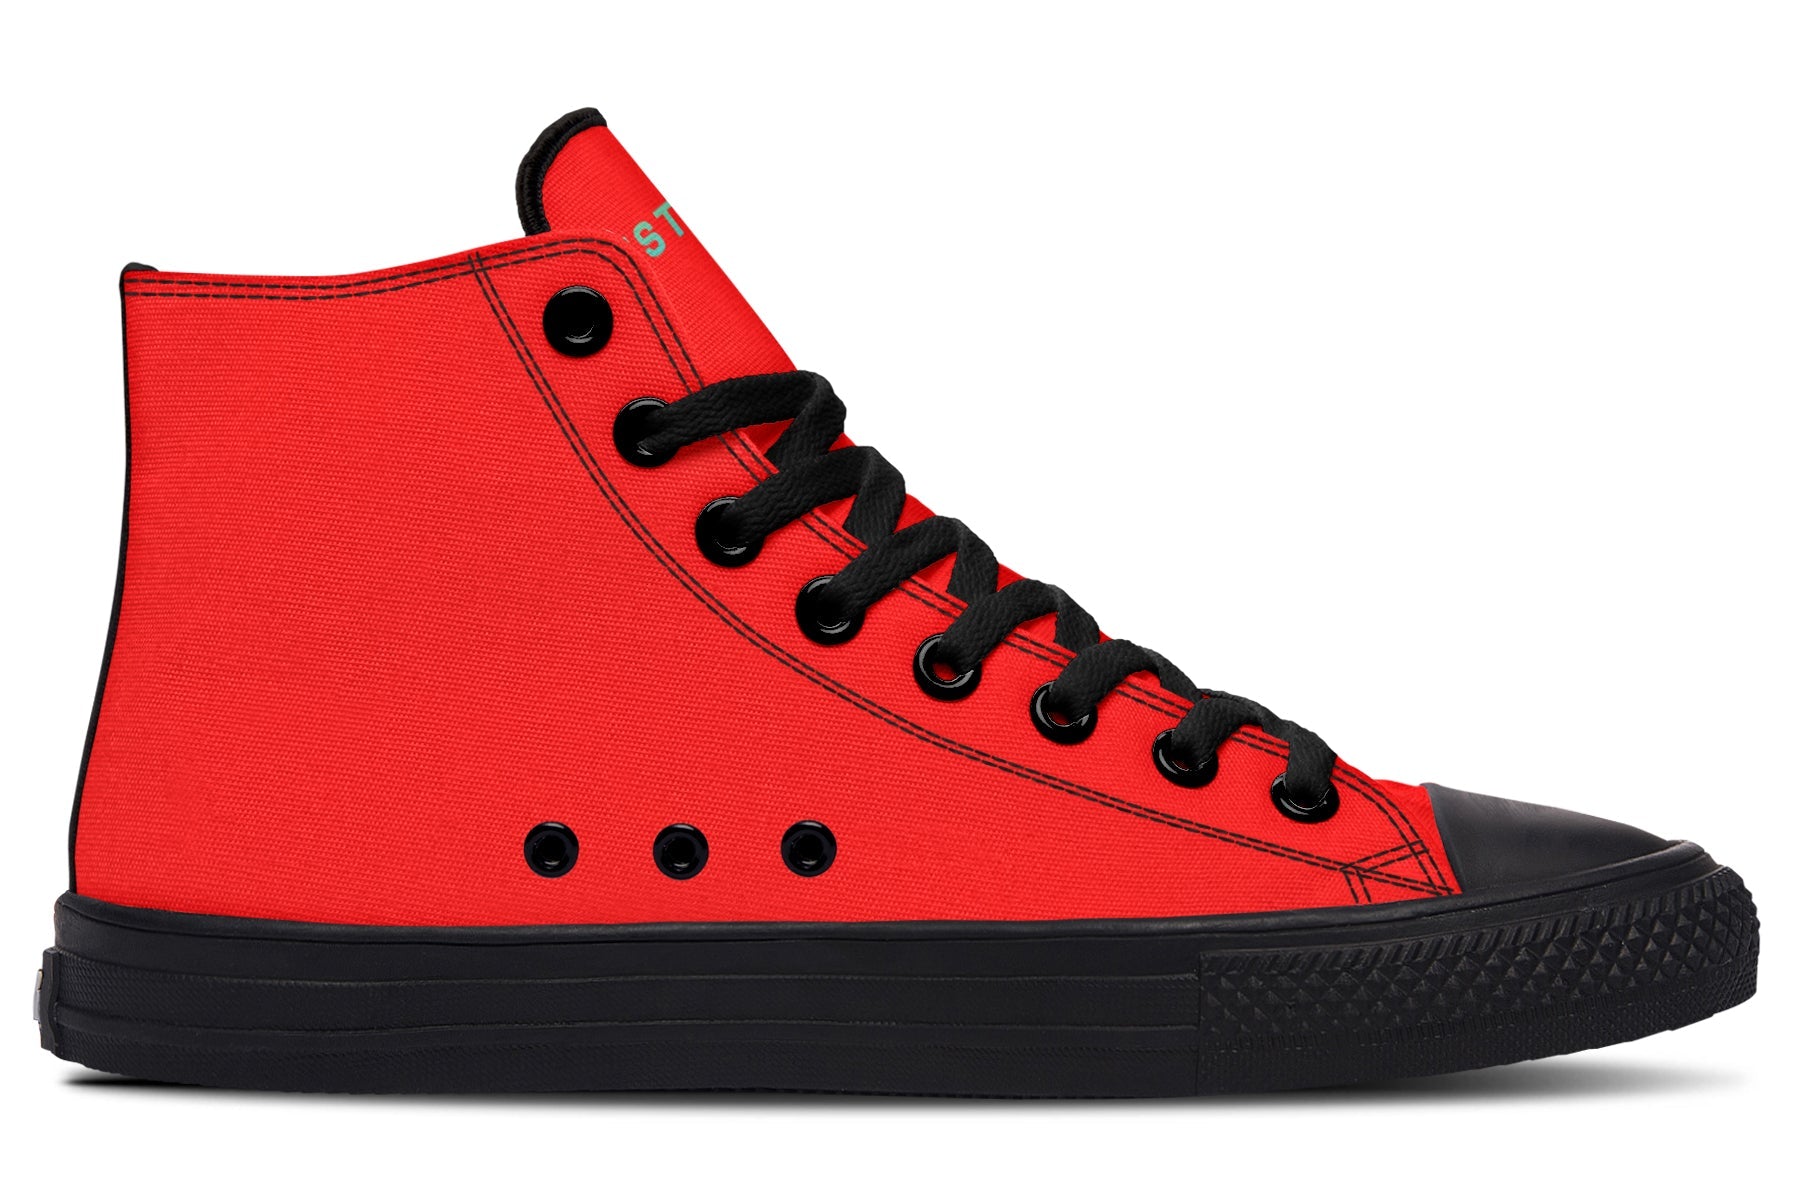 Unisex High Tops Bright Red